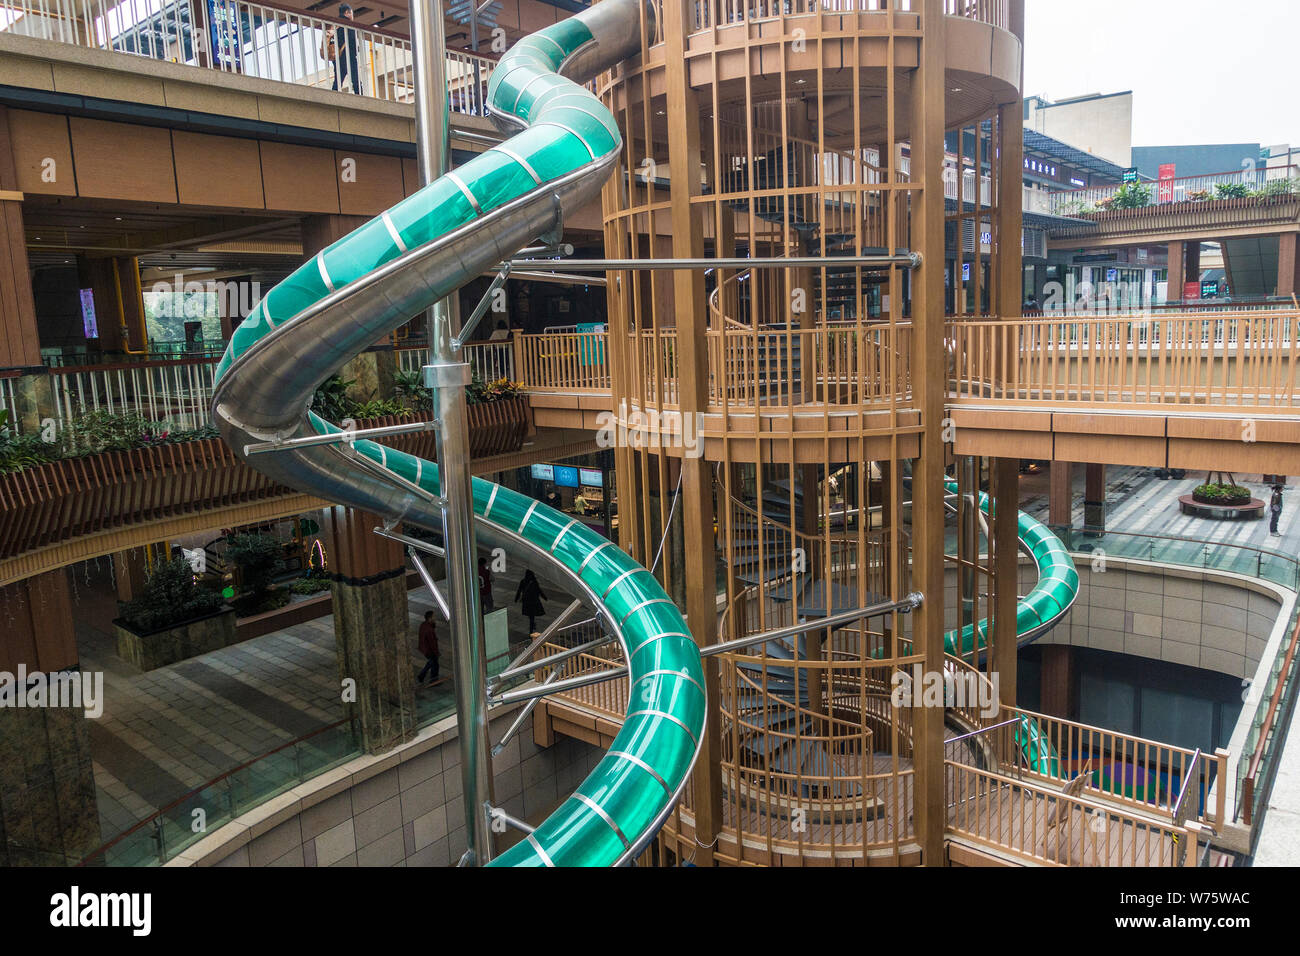 https://c8.alamy.com/comp/W75WAC/file-view-of-the-15-meter-tall-slide-and-other-slides-at-a-shopping-mall-in-chengdu-city-southwest-chinas-sichuan-province-2-december-2017-a-W75WAC.jpg